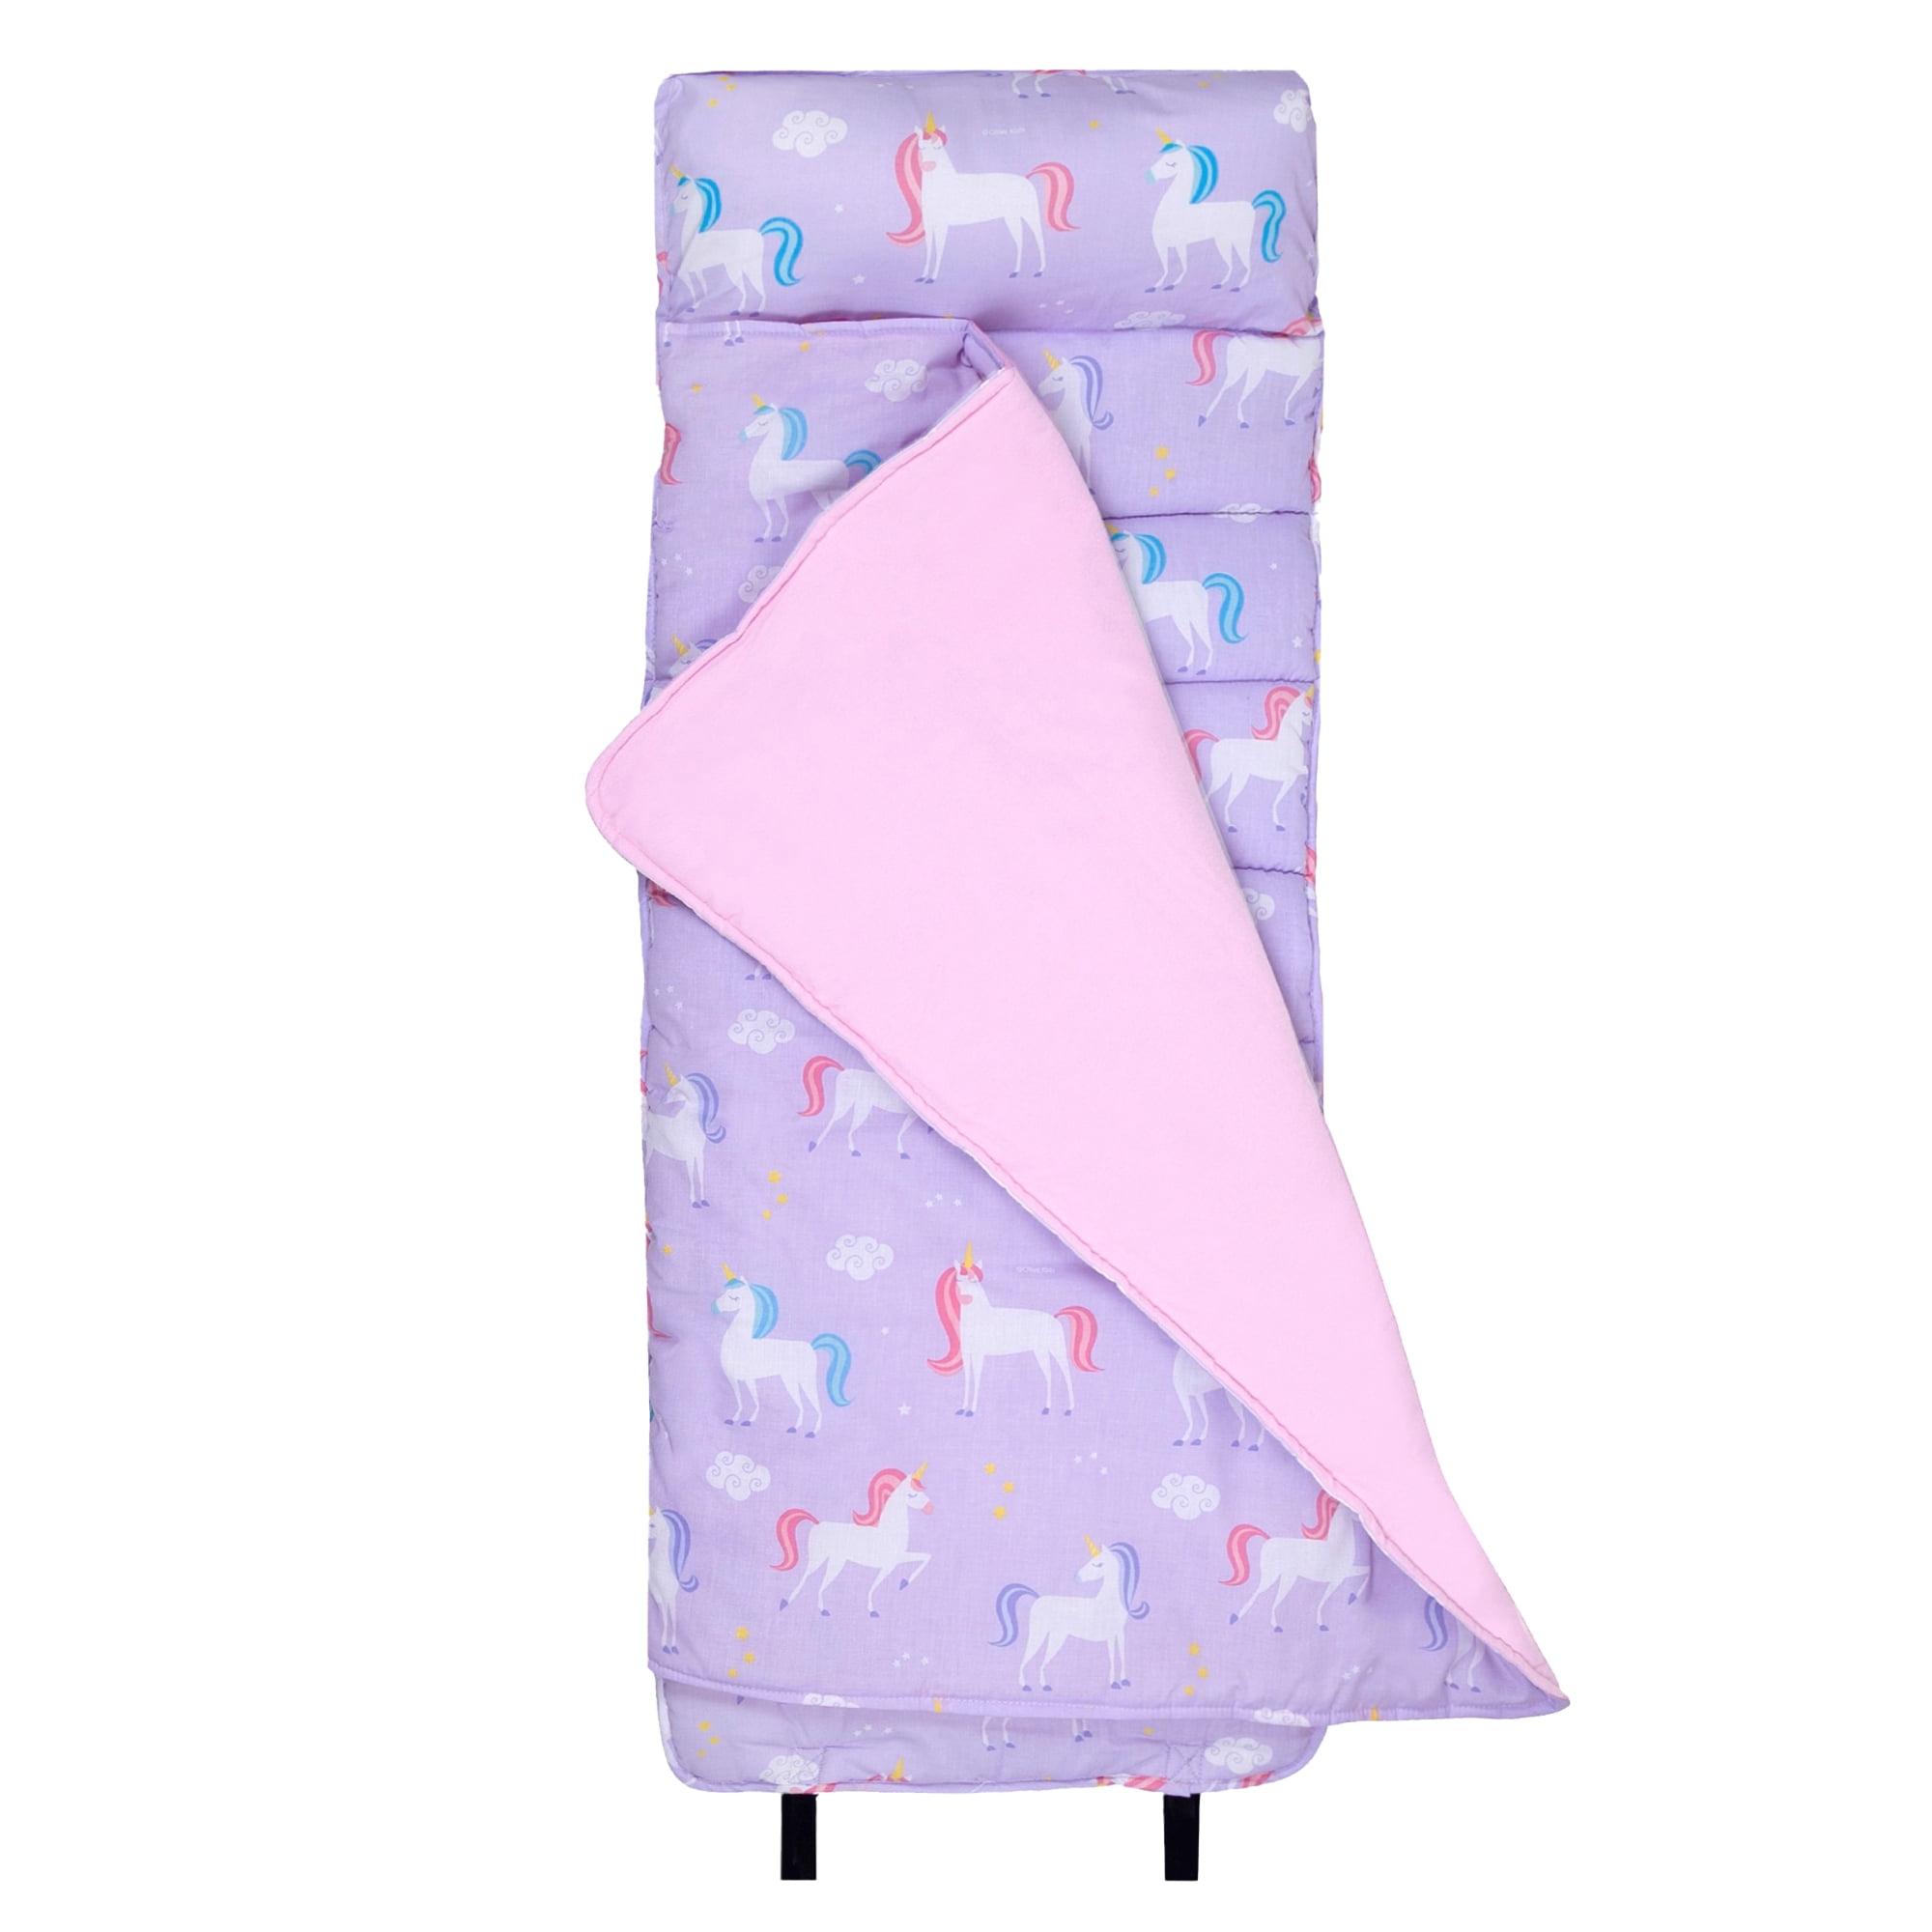 Wildkin Original Nap Mat for Toddler Boys and Girls, Ideal for Daycare and  Preschool, Hypoallergenic, Phthalate and BPA Free, Roll-up Design (Fairies  Pink) - Walmart.com